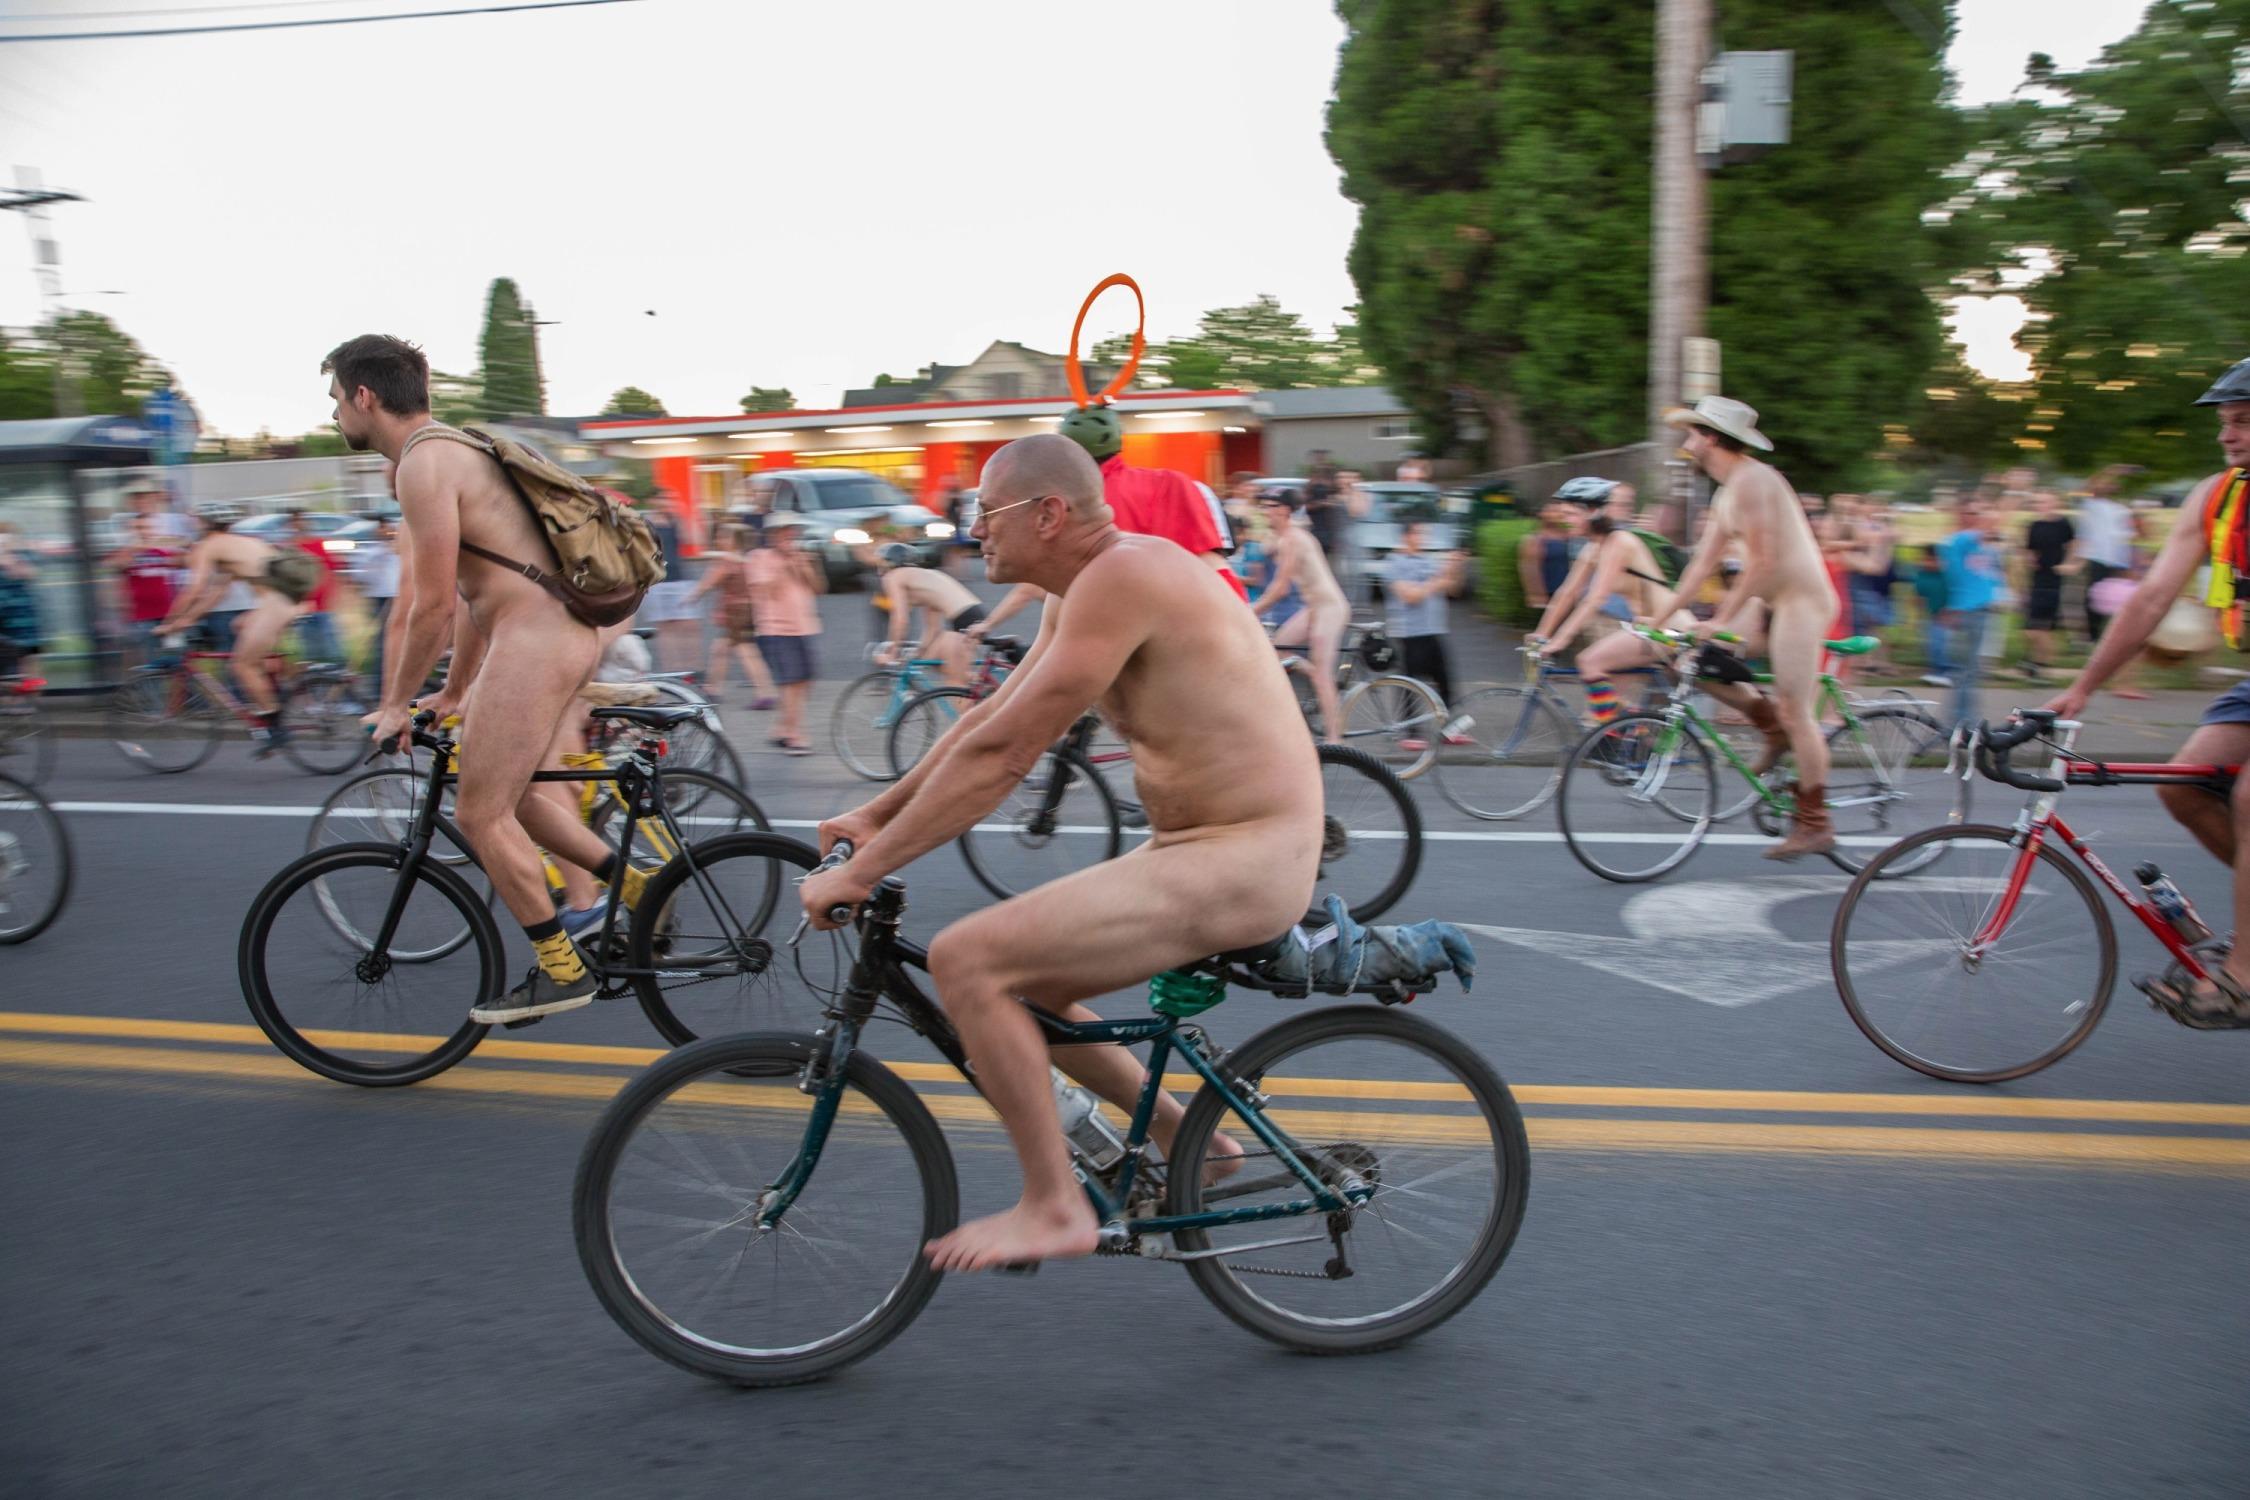 Riders begin Portland's edition of the 2017 World Naked Bike Ride.